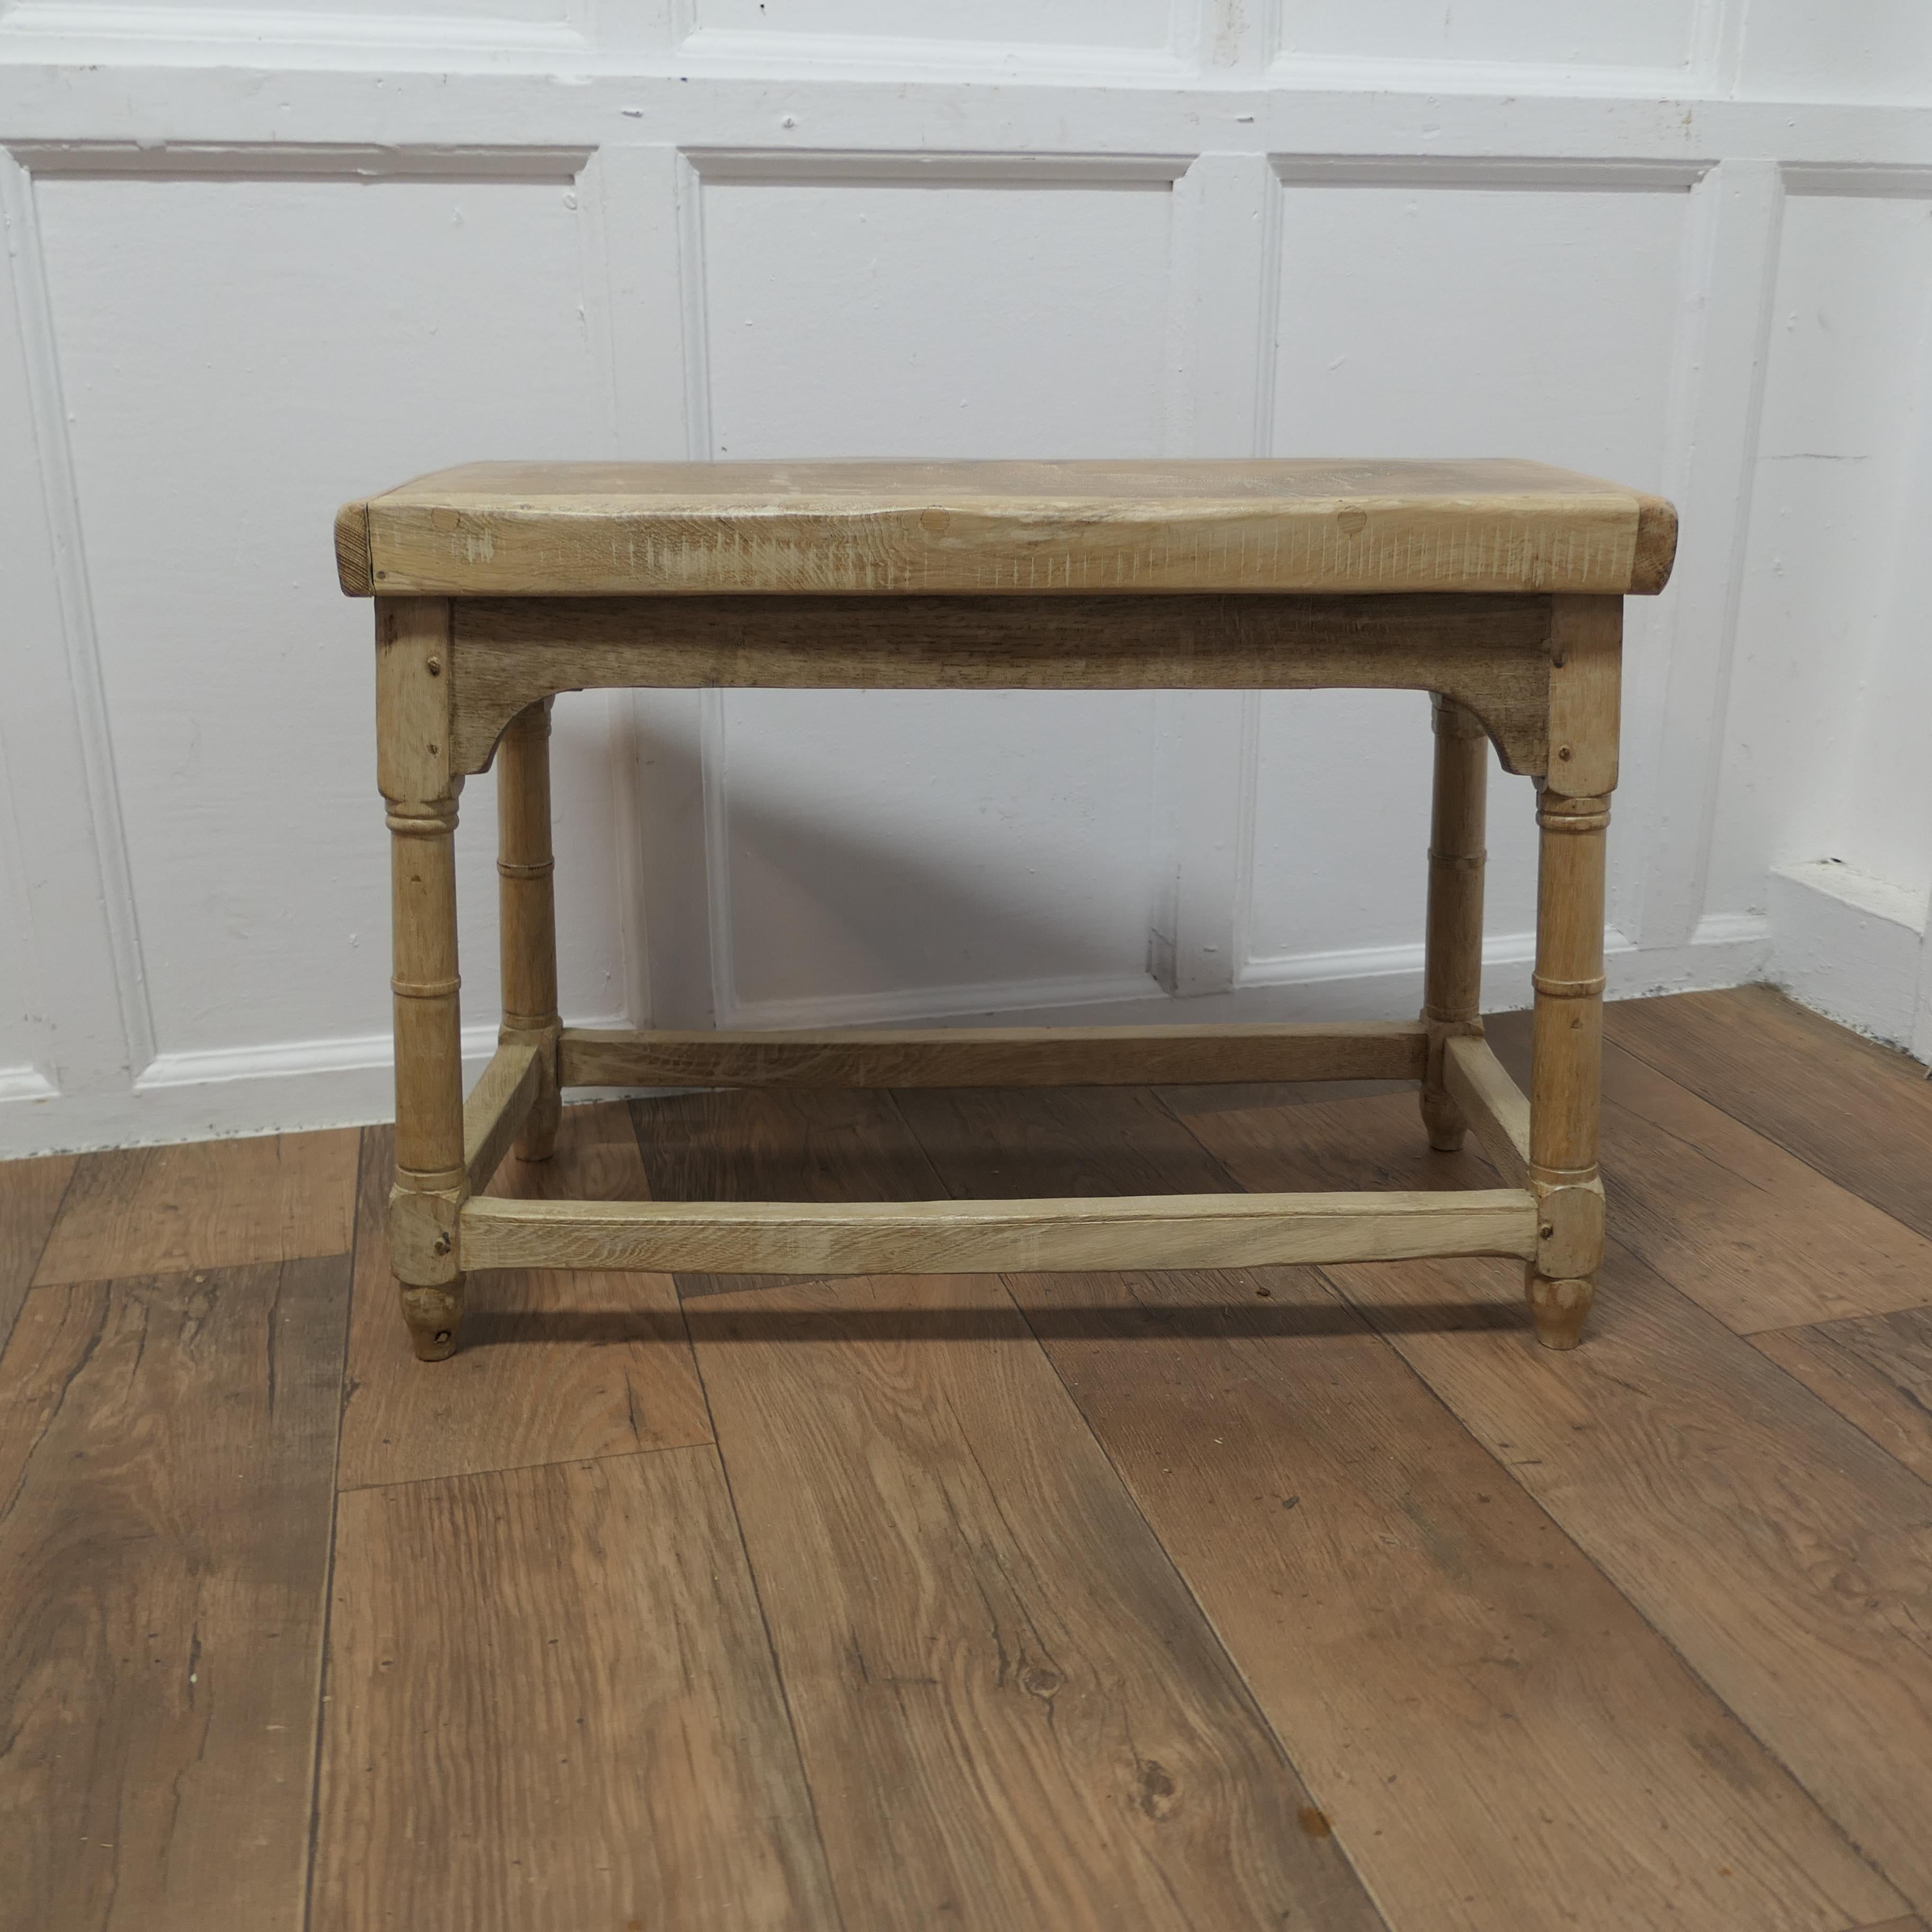 Carpenters Rustic Bleached Oak Joint Stool

This is a wonderful piece, the stool is made in 2” thick oak, and it has a seat made smooth and tactile from many years of trouser buffing
The single plank top is oak trimmed on 3 sides and it is in very